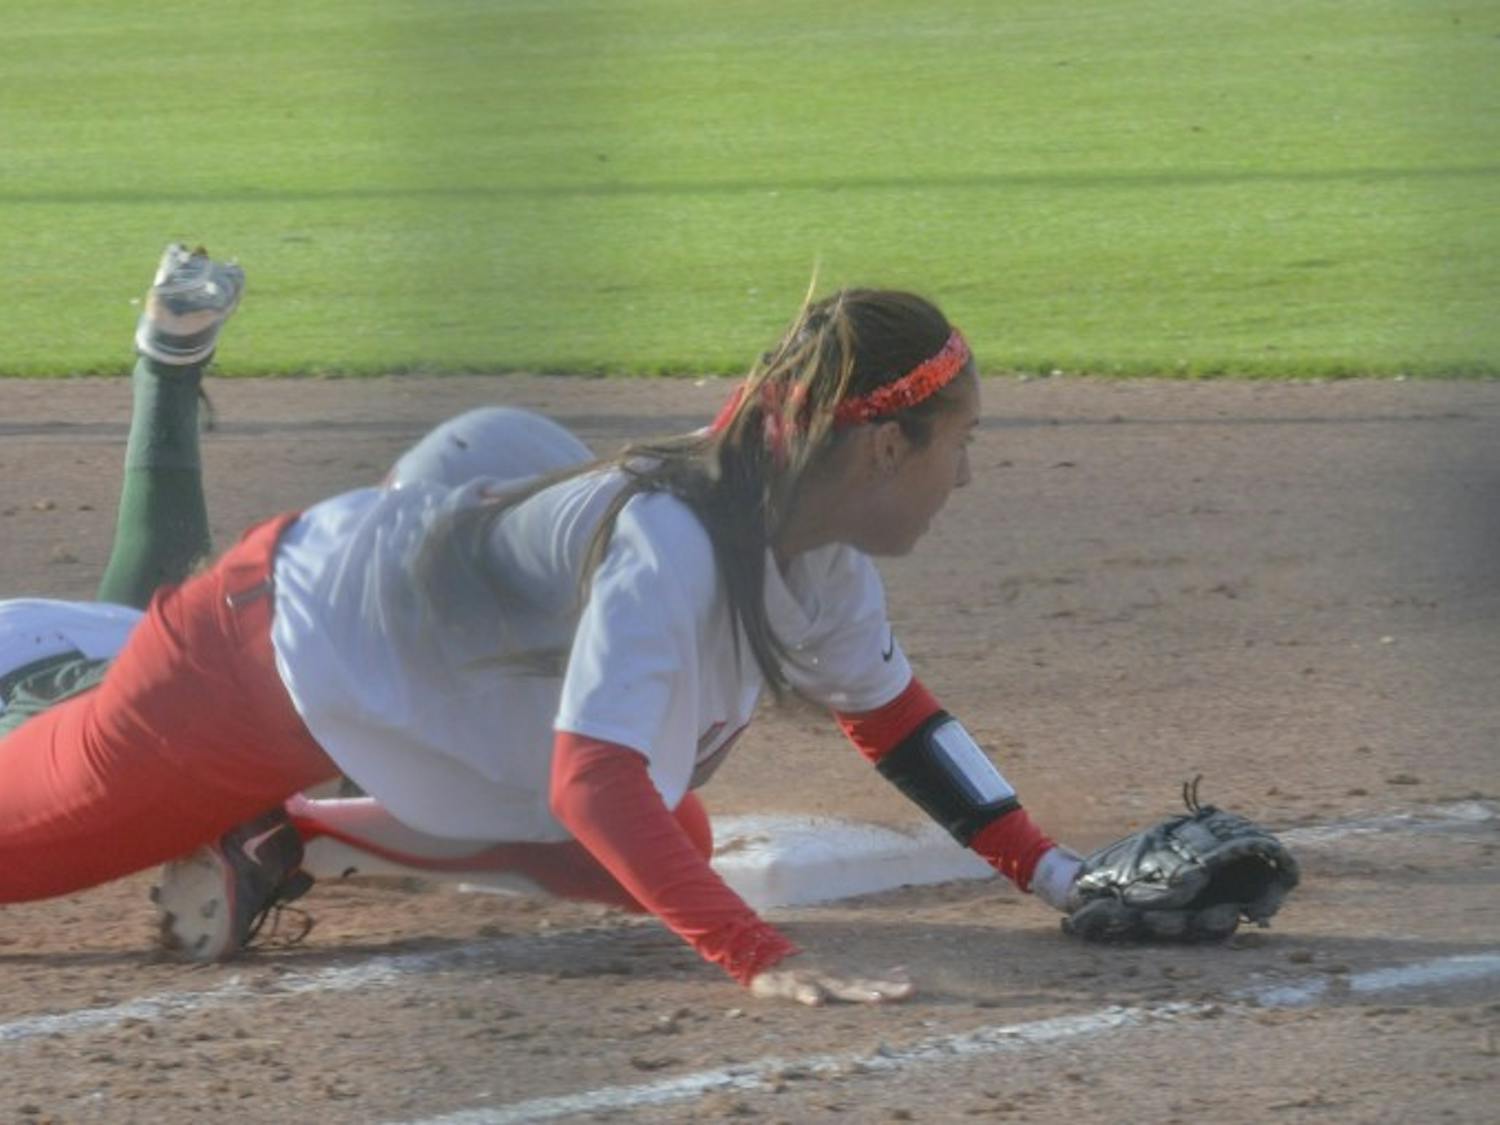 UNM infielder Karissa Haleman misses the ball to take out the Colorado player at Lobo field Saturday. The Lobos won the series. 
